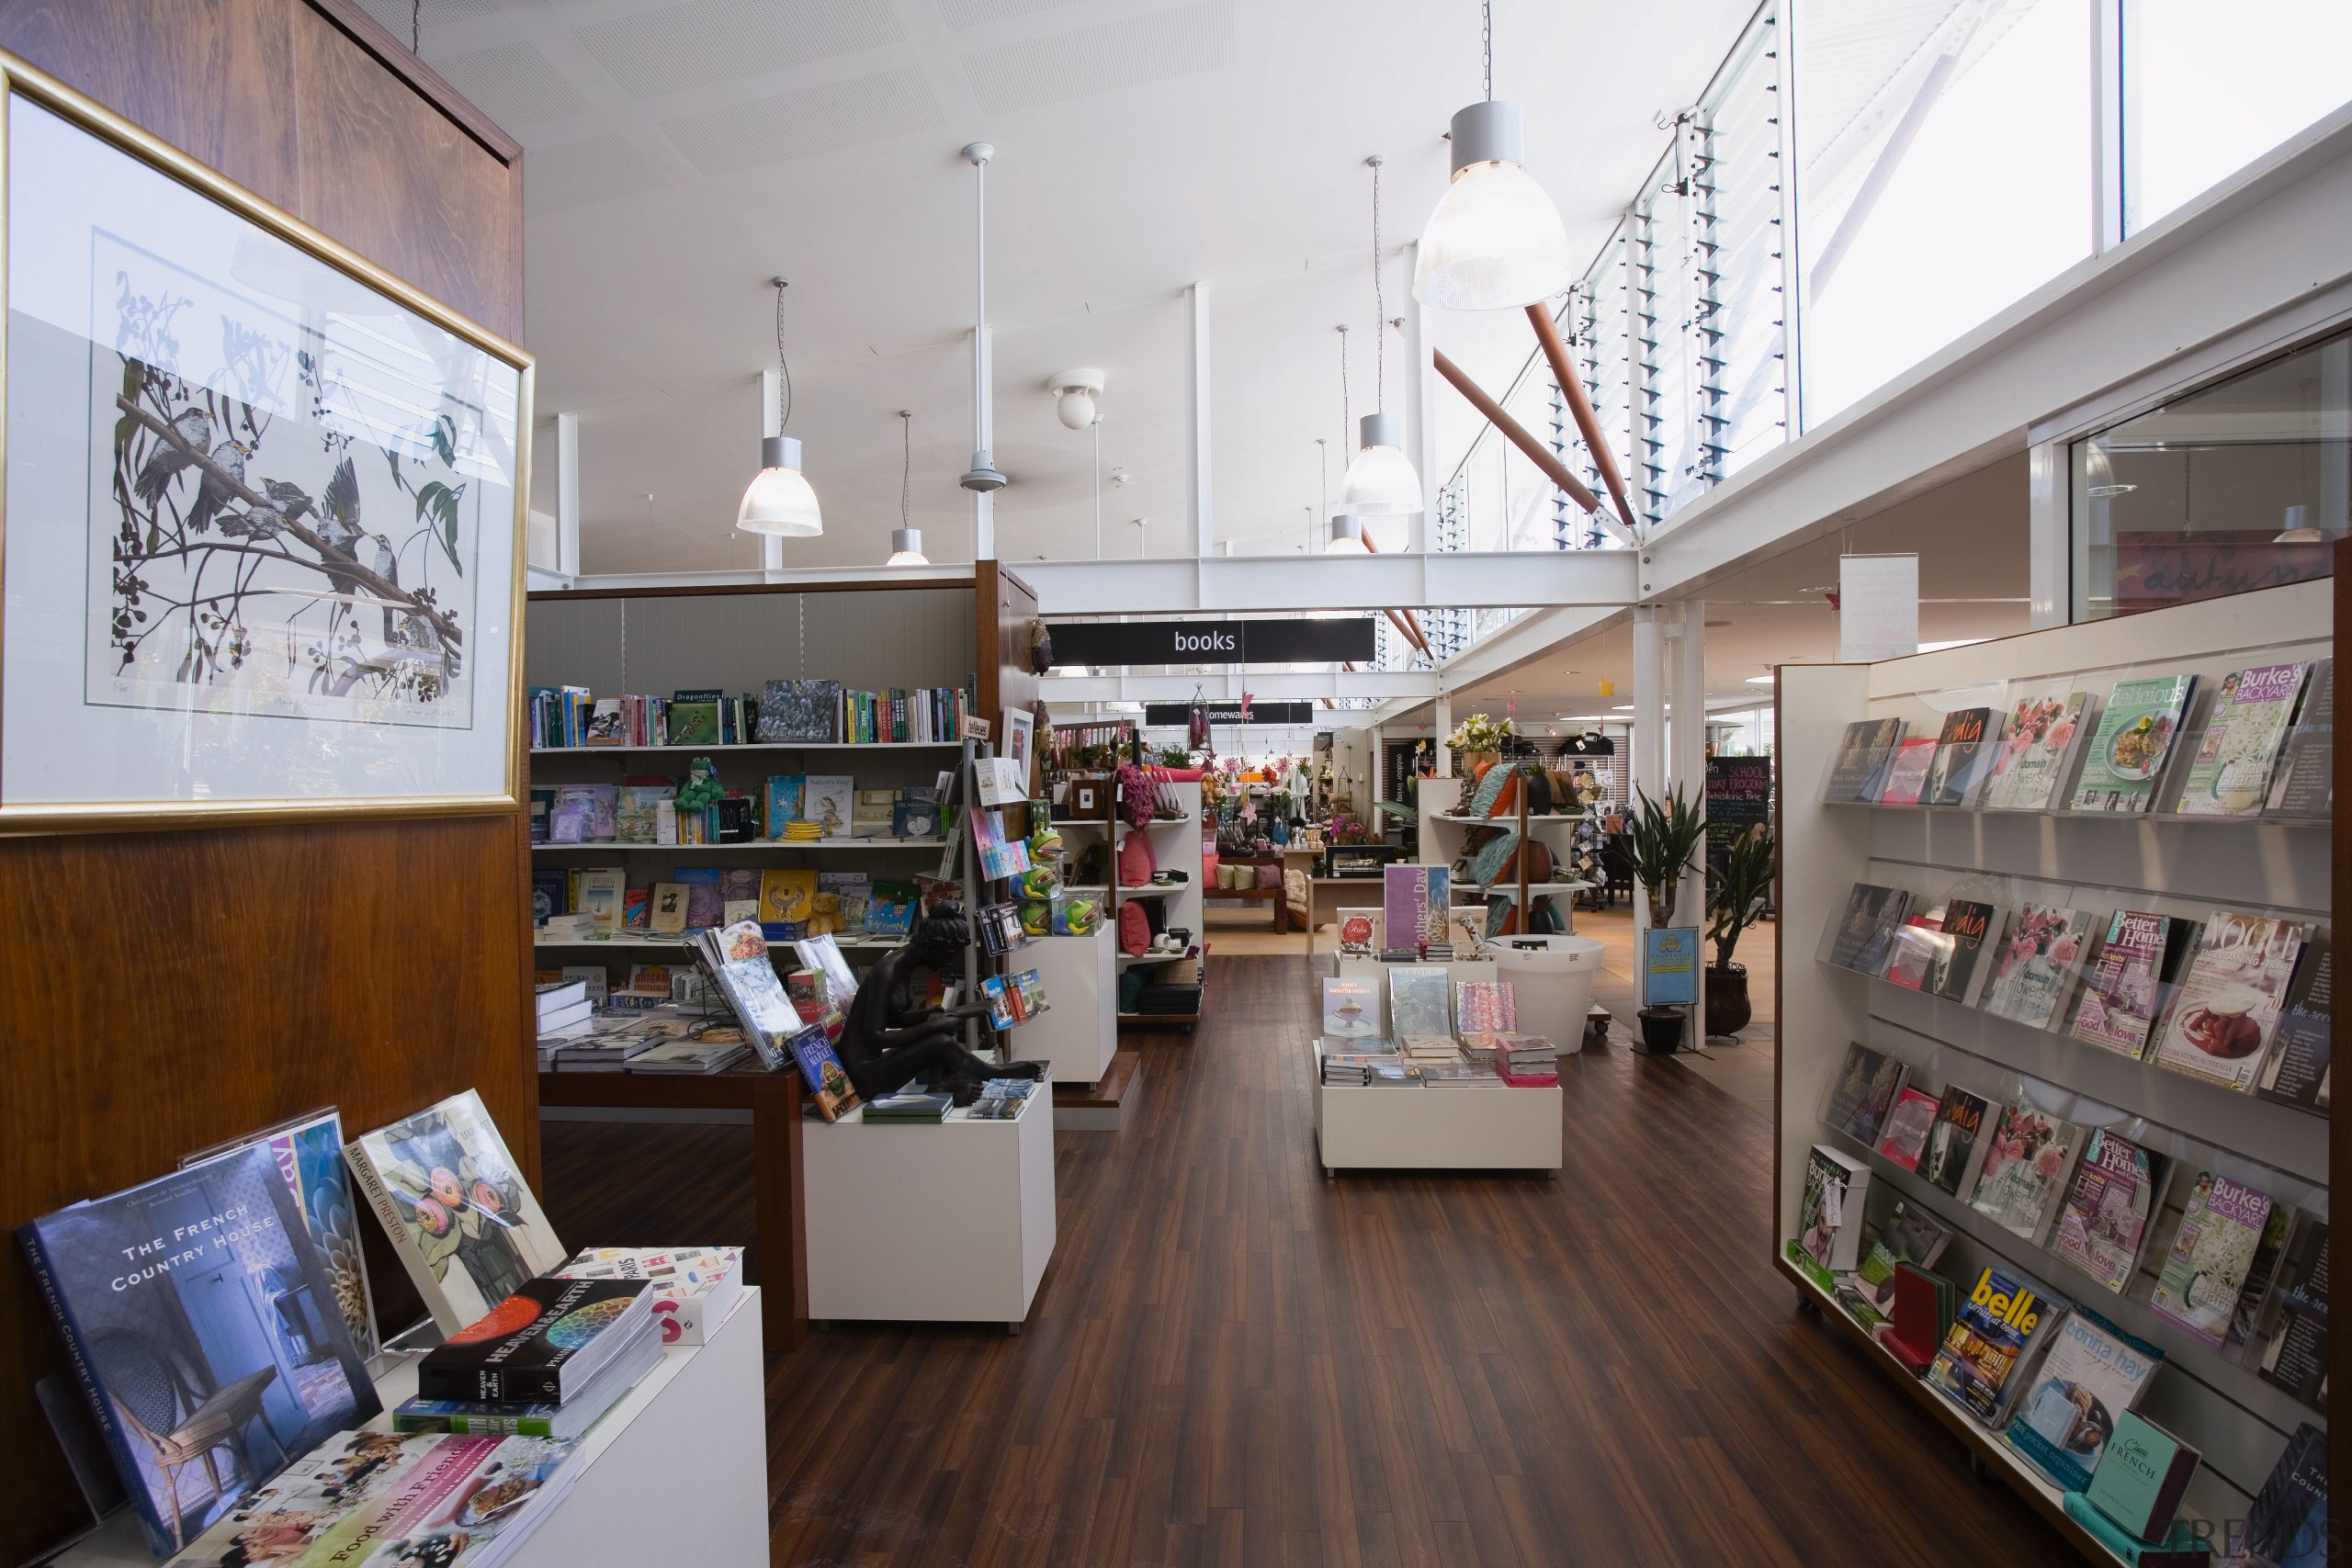 A view of the retail area. - A bookselling, exhibition, institution, interior design, library, public library, retail, gray